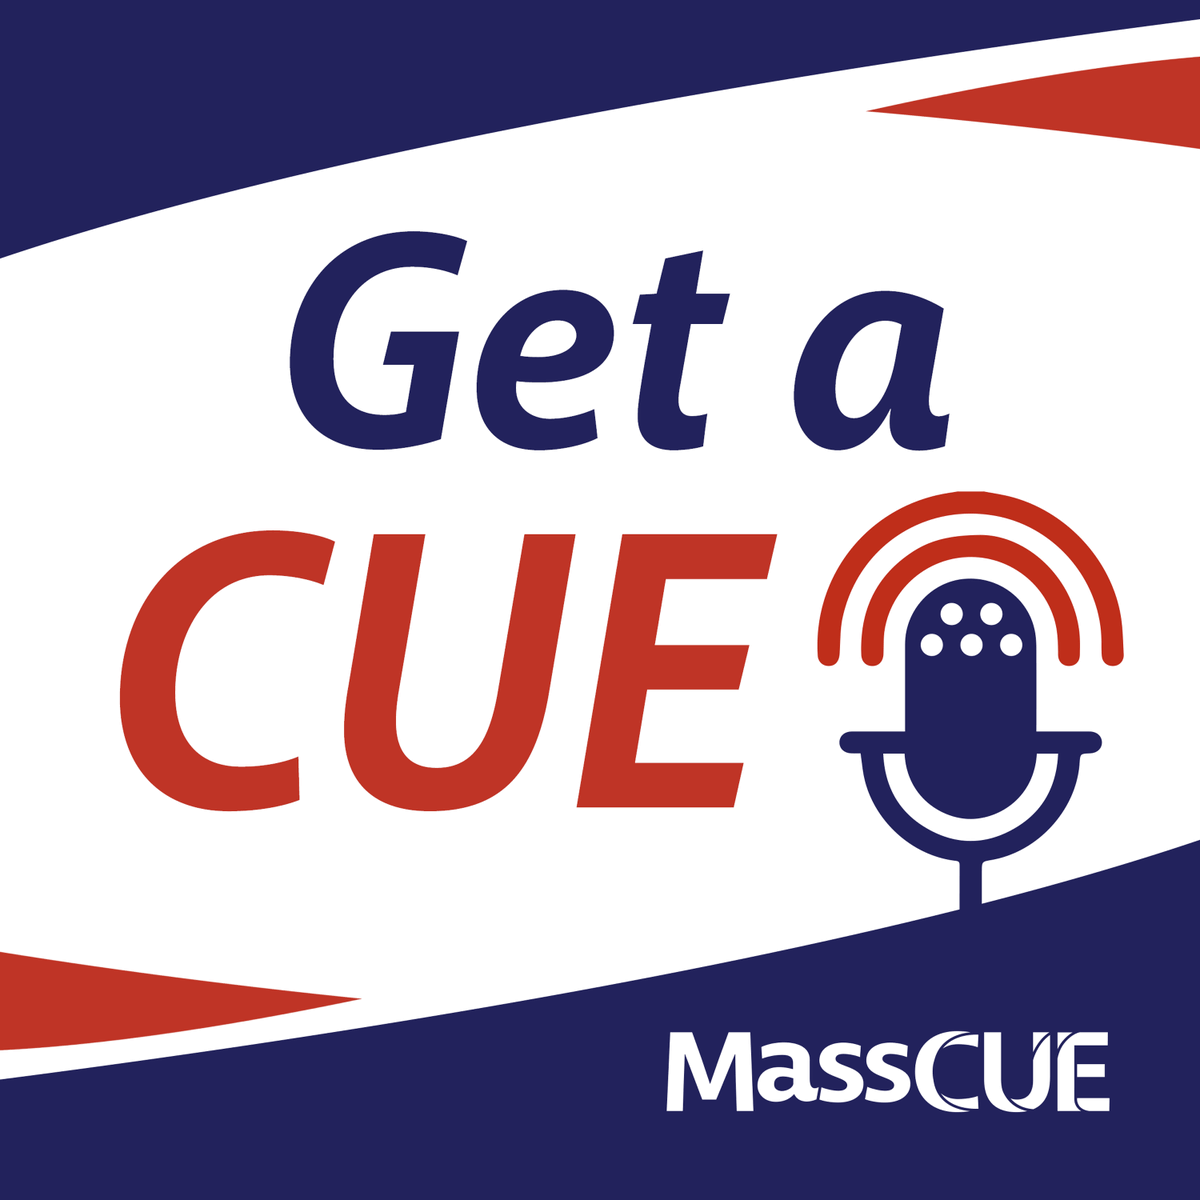 The Get a CUE Podcast is back with a special double episode featuring @cjgosselin with a #MassCUE Fall Conference preview and @BlendedLibGirl with details on BC->DE. Check it out! bit.ly/46pekYR @HallsHomework @MrsErinFisher @cterrillteach @PadulaJohn @marissafoley325